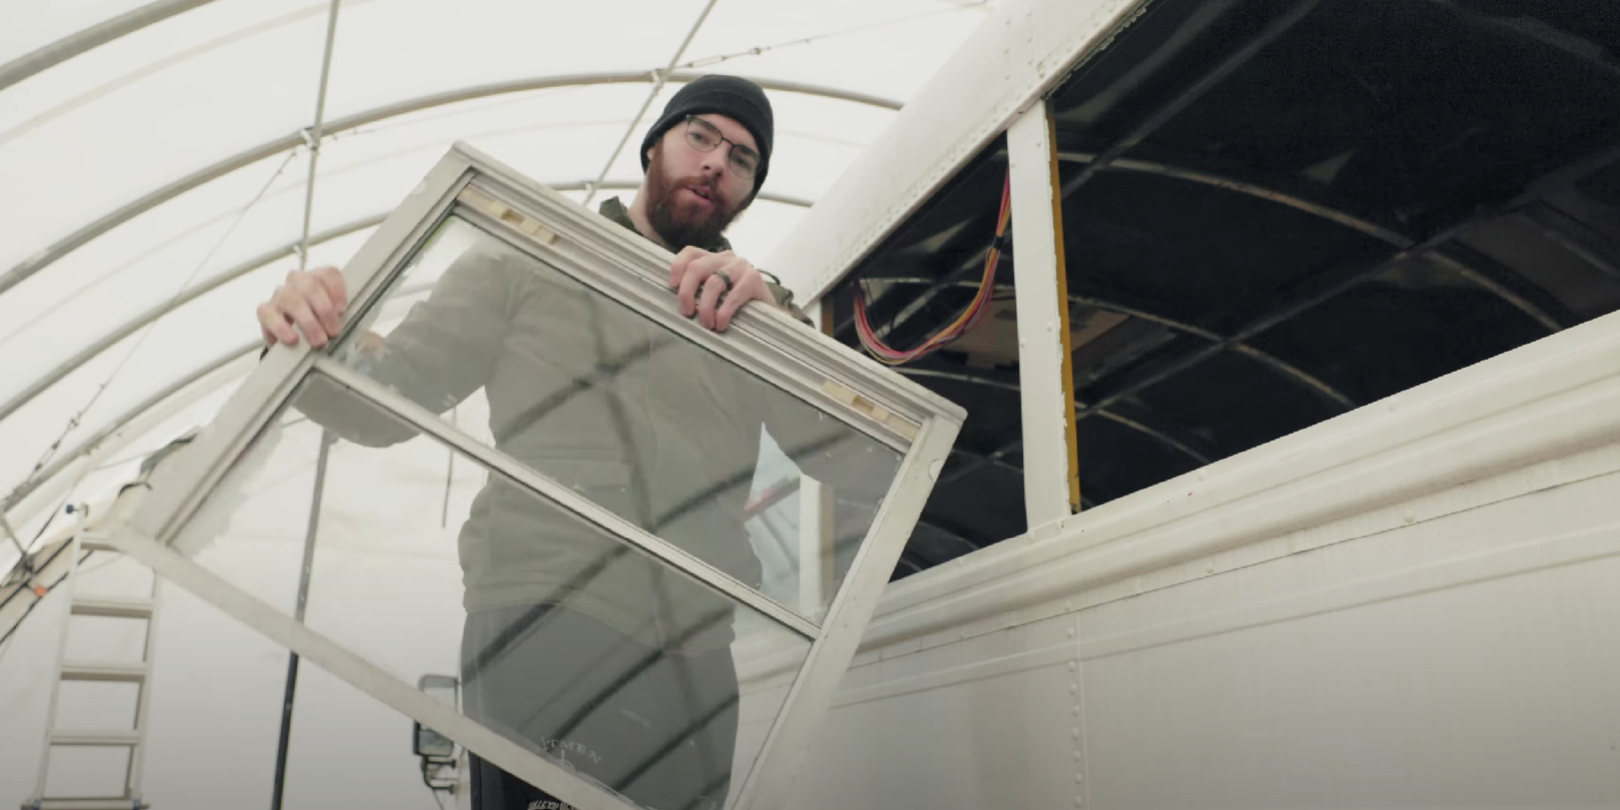 How To Remove Bus Windows: Step-by-Step Guide